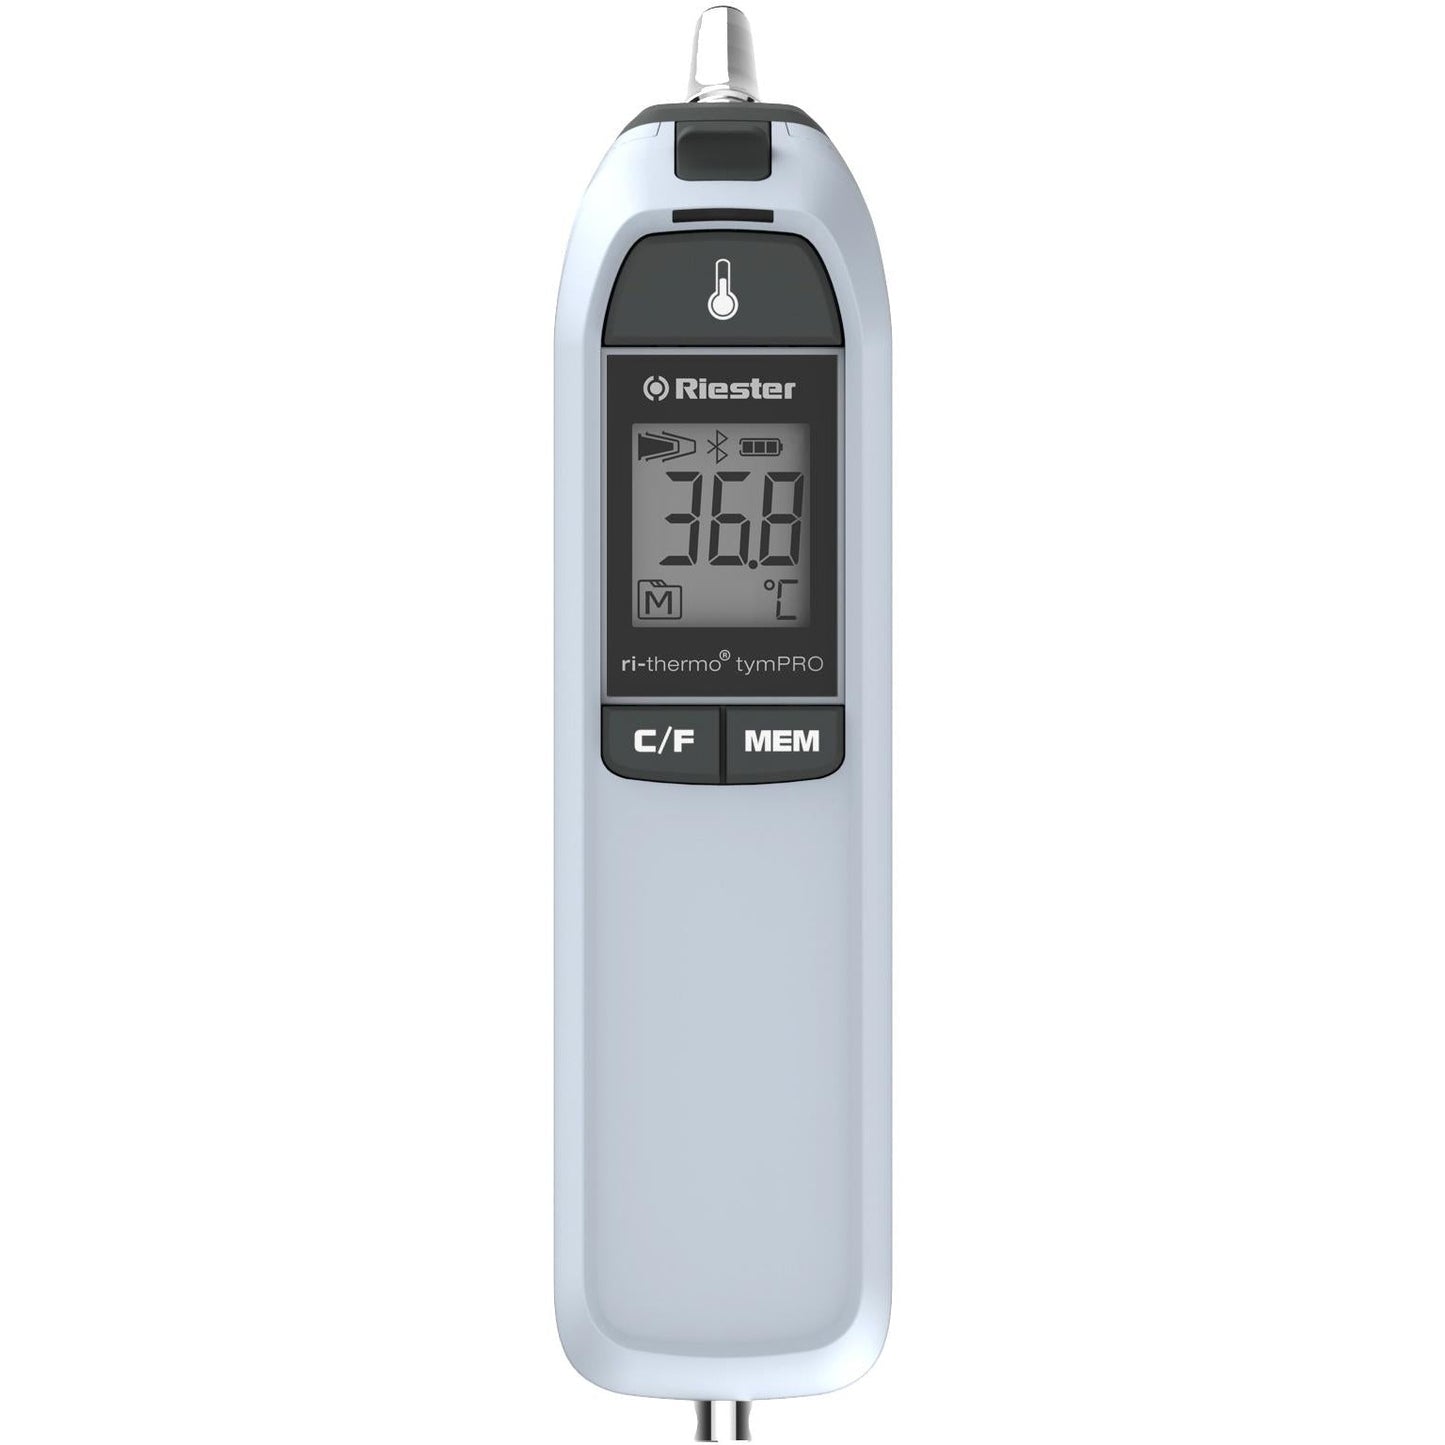 Riester TYMPANIC Thermometer ri-thermo® tymPRO+ With Bluetooth